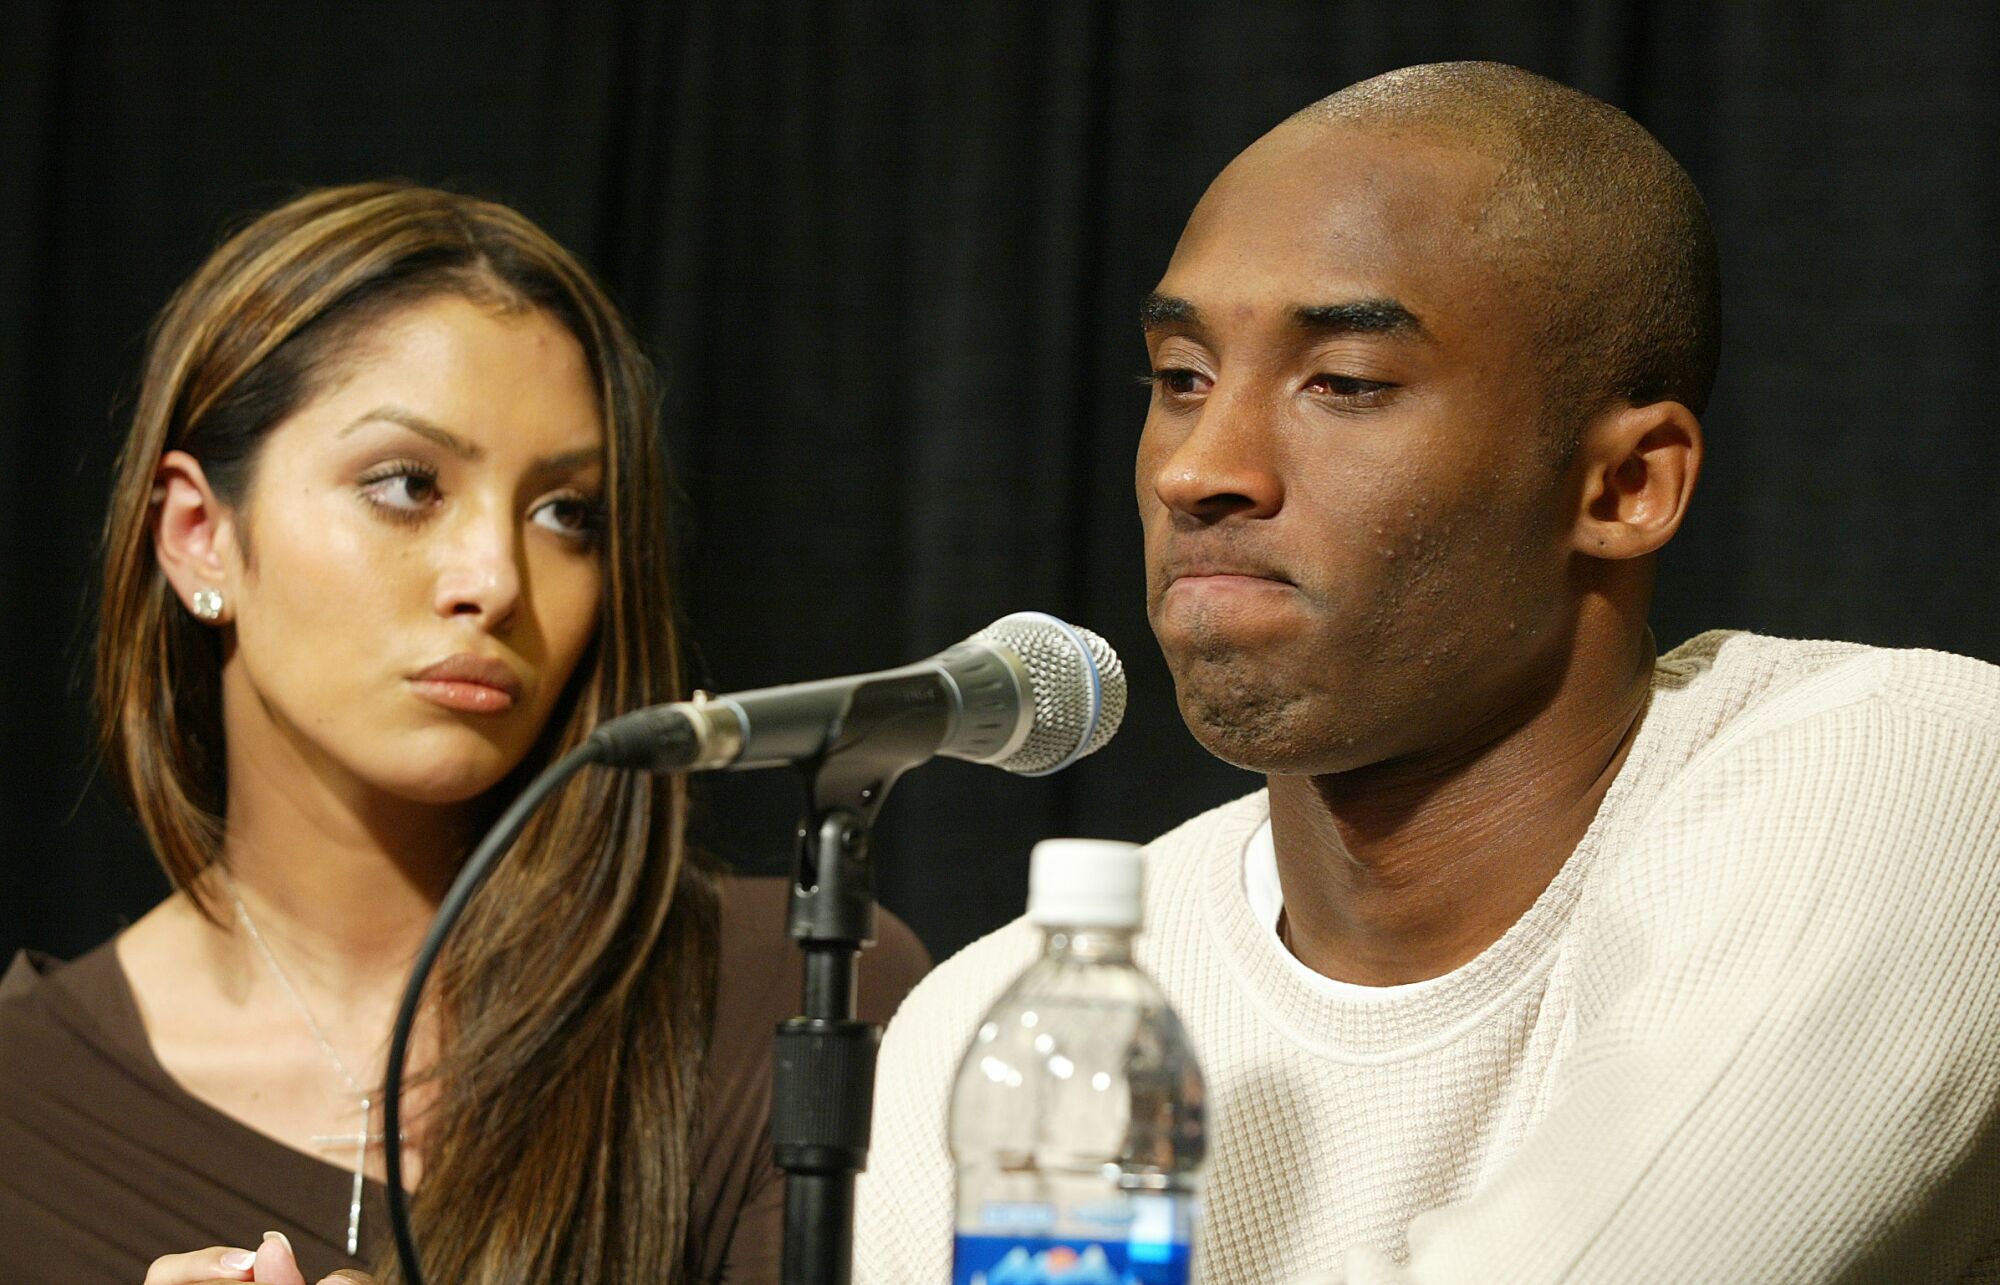 Kobe Bryant and his wife Vanessa at a news in 2003 to discuss the allegations against him in Eagle, Colo.